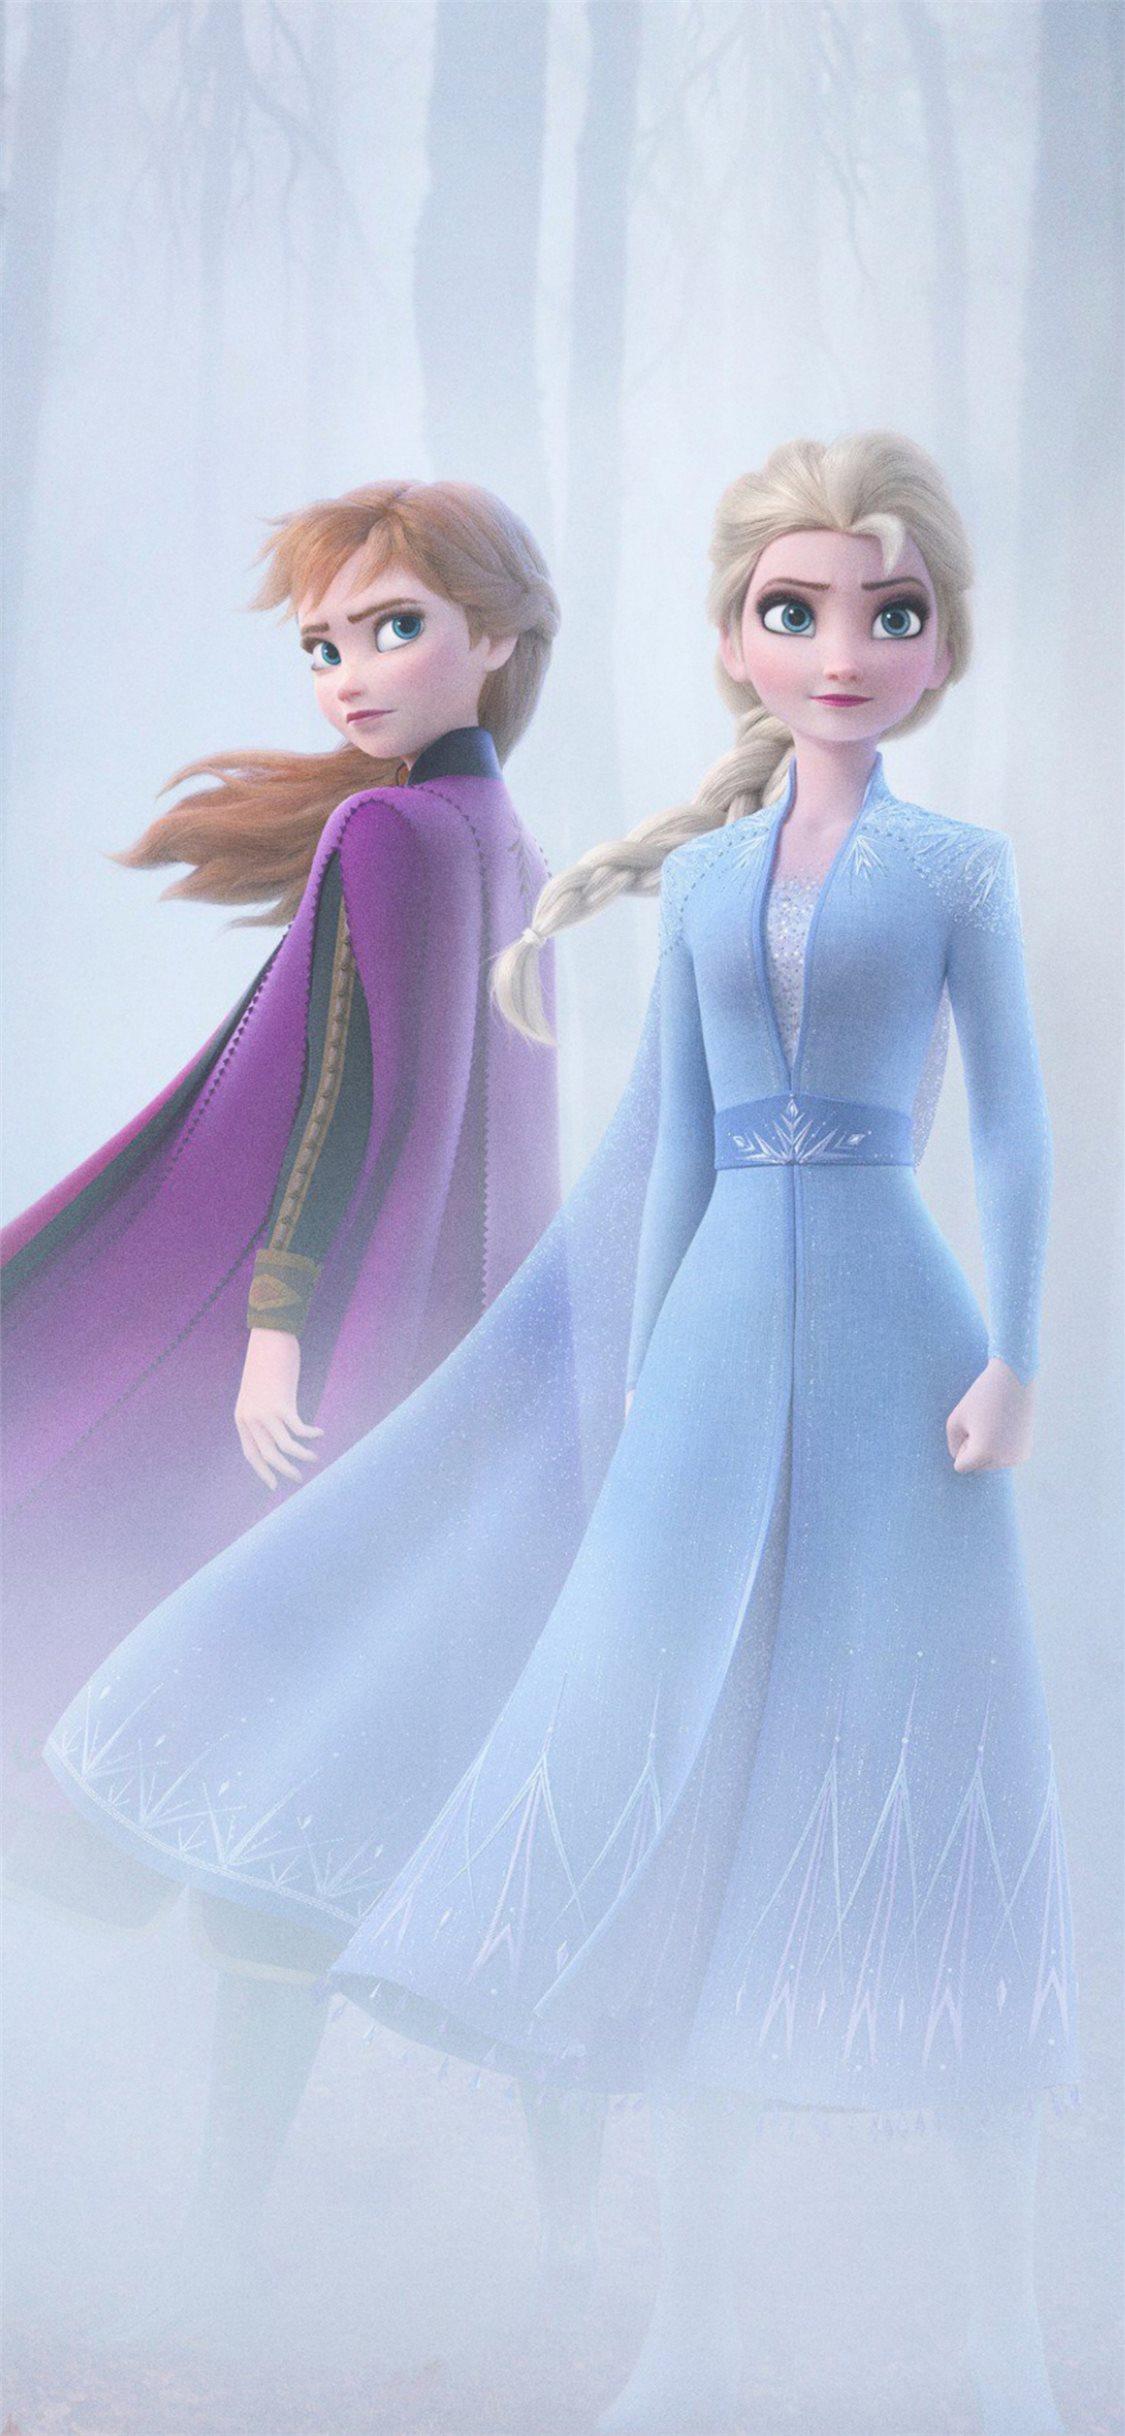 anna and elsa in frozen 2 4k iPhone X Wallpaper Free Download